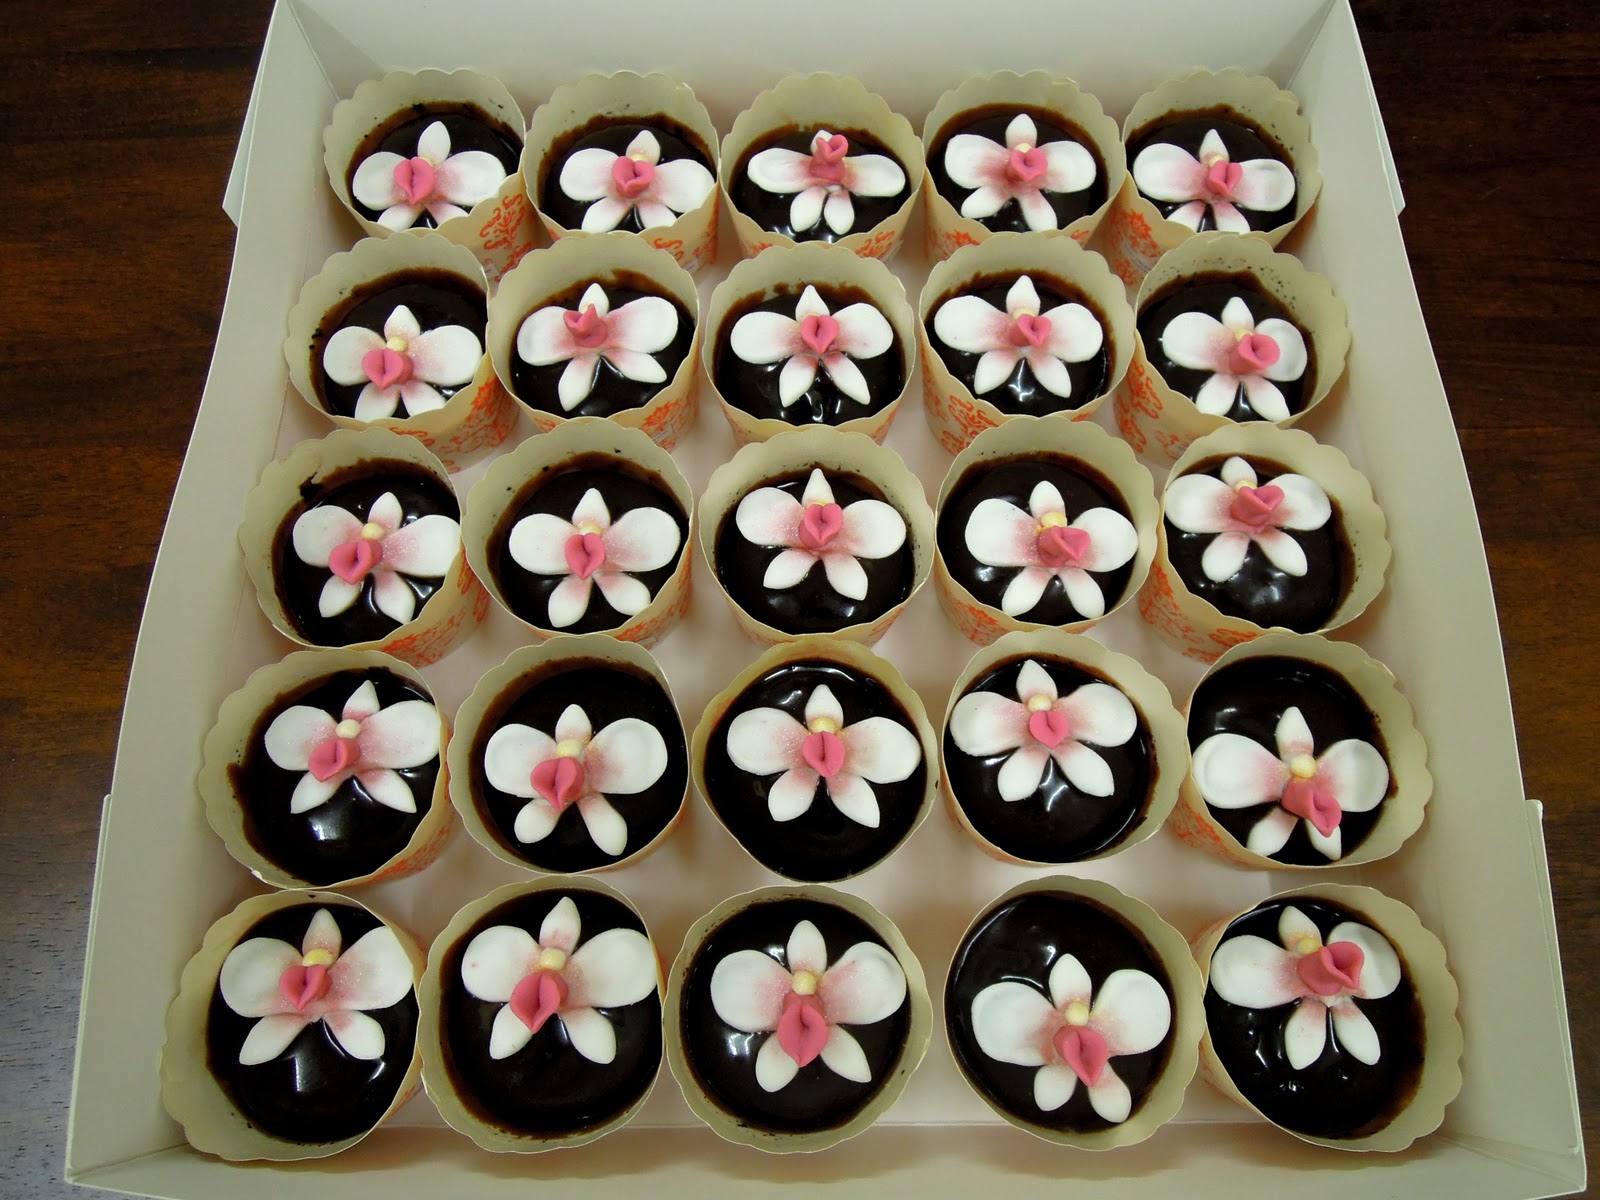 Chocolate Cupcakes with Orchids | Read Sources